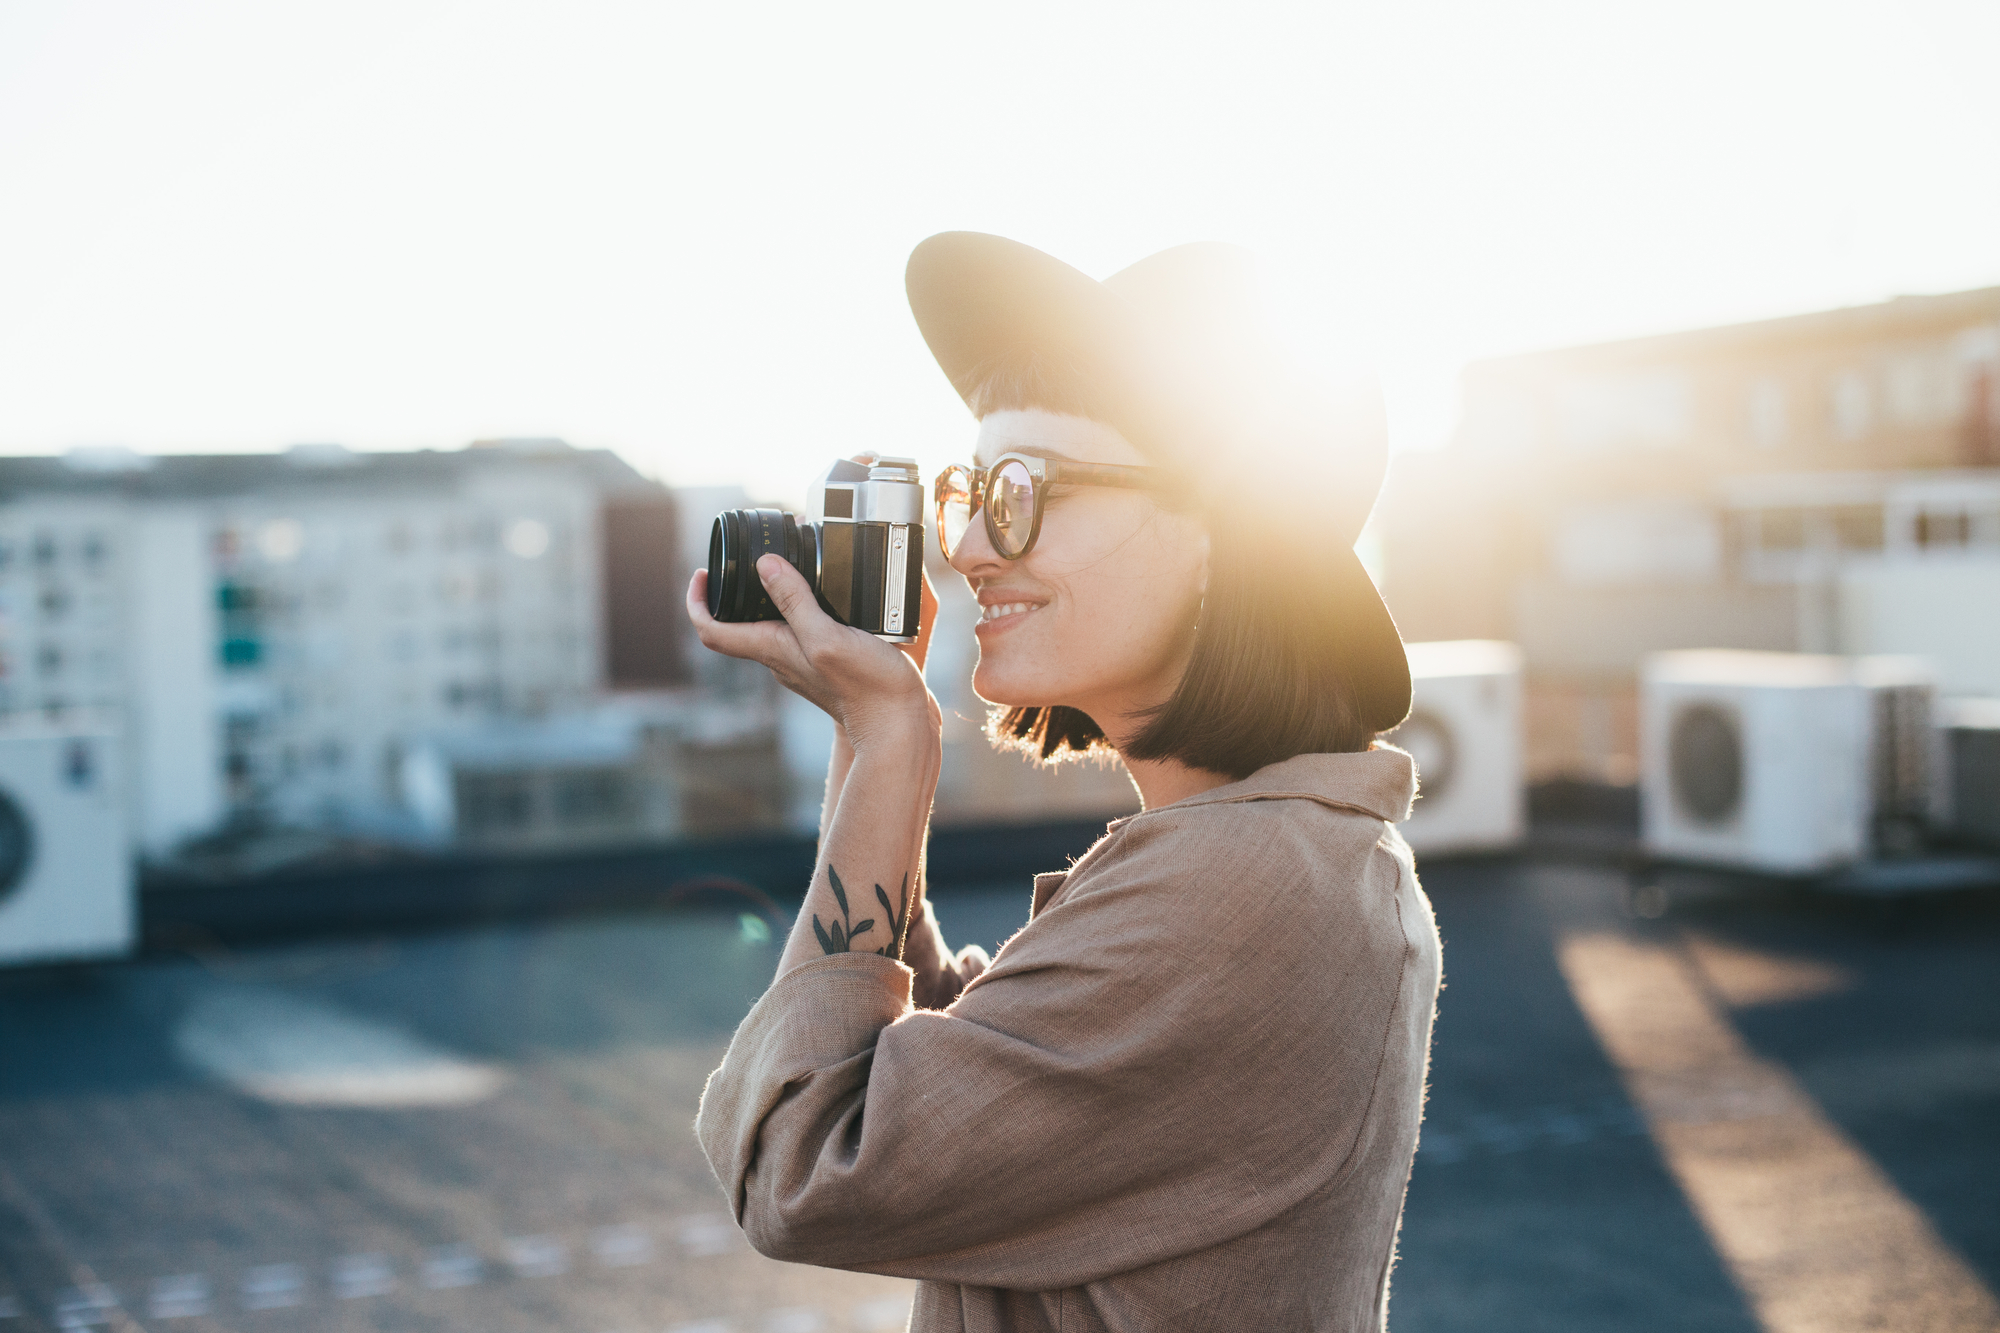 How to Find Clients as a Freelance Photographer